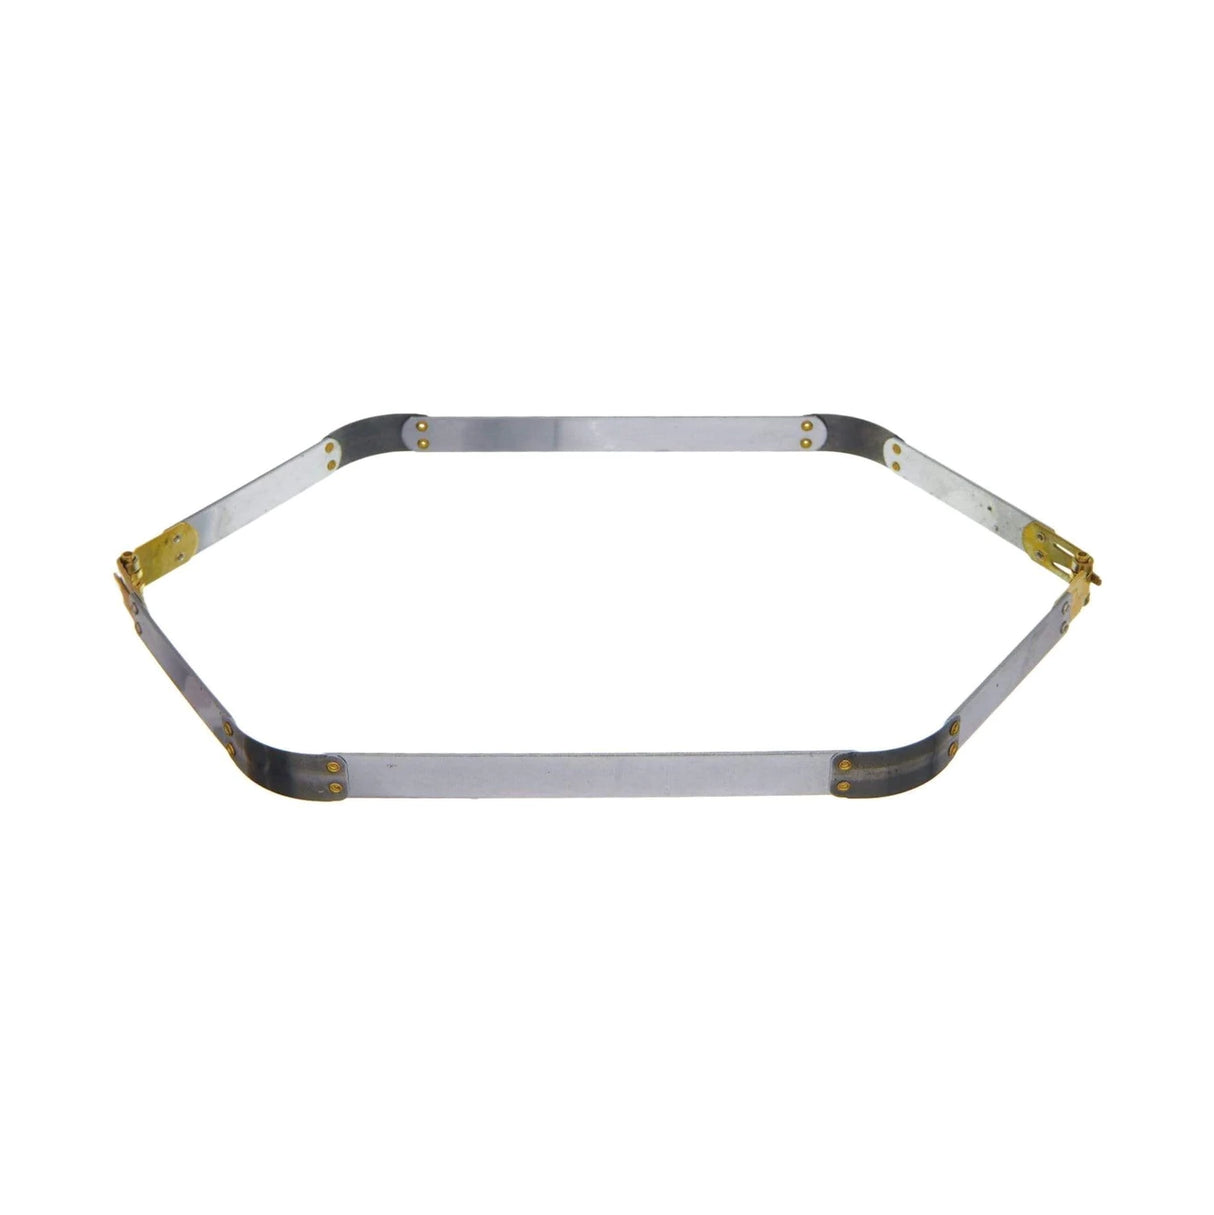 14" Facile Hexagonal Frame With Brass Hinges, Steel, #A-44-14